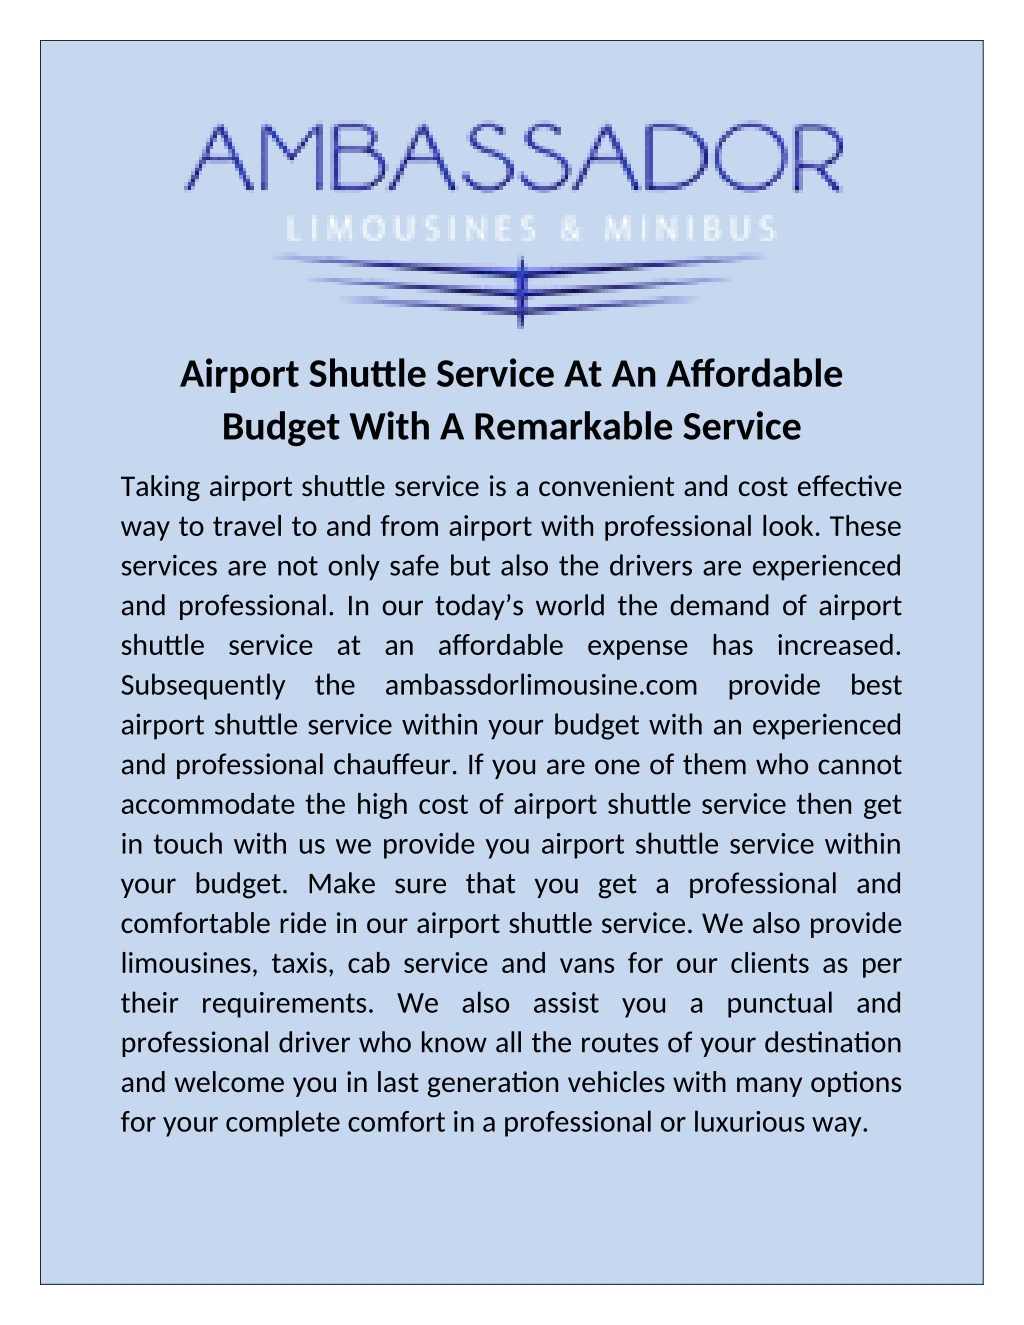 airport shuttle service at an affordable budget